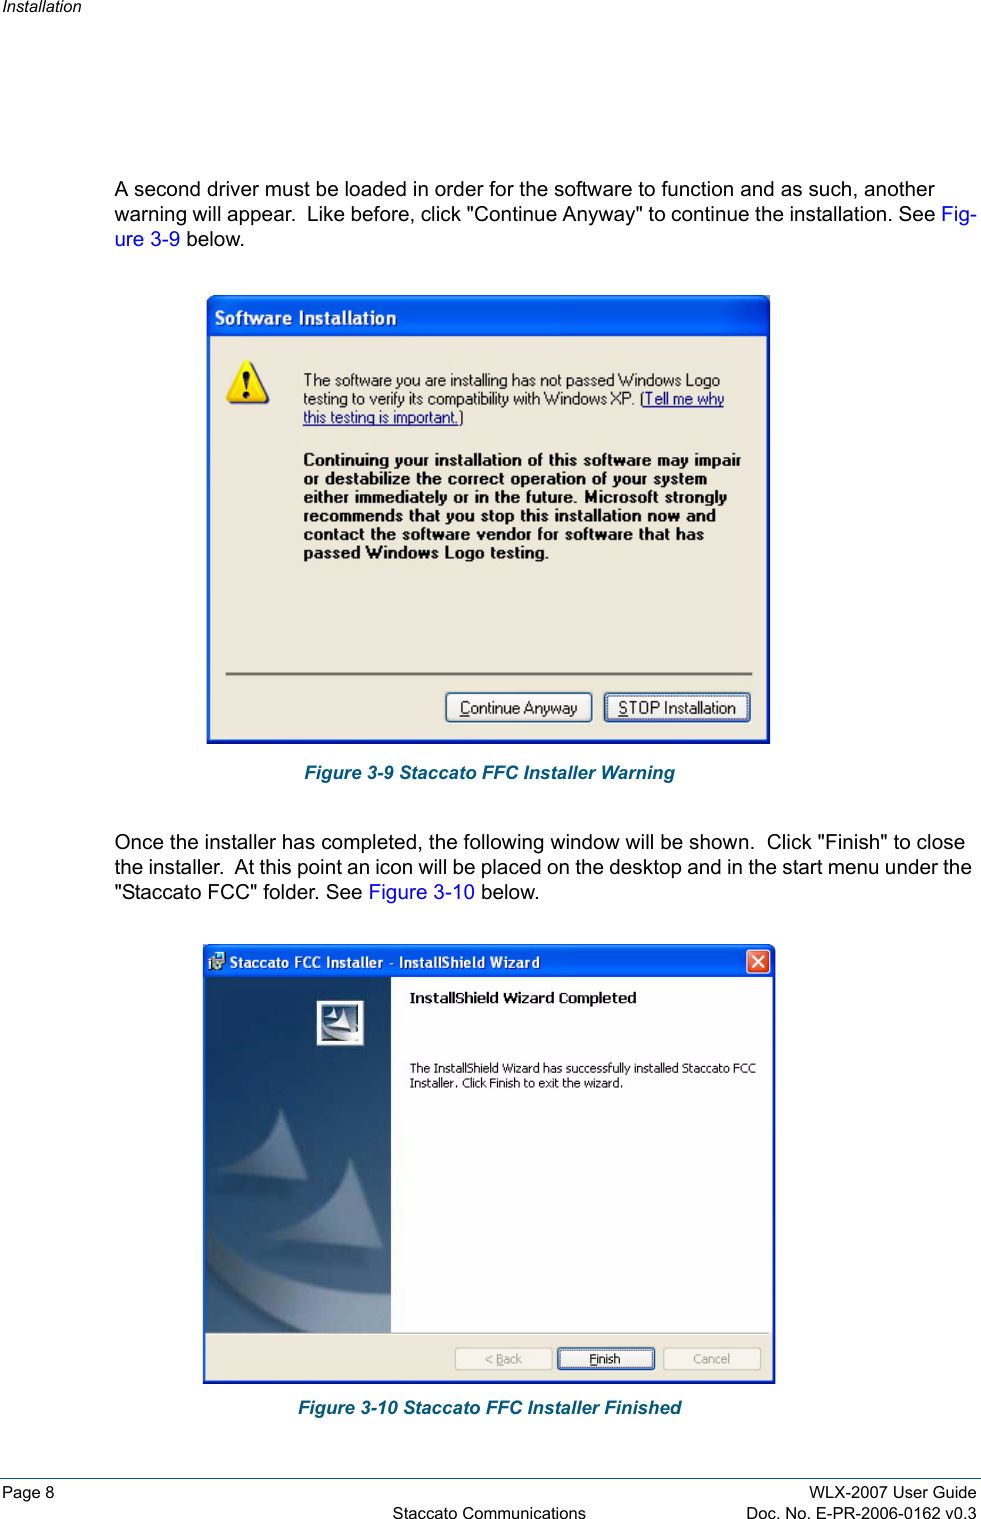 InstallationPage 8 WLX-2007 User GuideStaccato Communications Doc. No. E-PR-2006-0162 v0.3A second driver must be loaded in order for the software to function and as such, another warning will appear.  Like before, click &quot;Continue Anyway&quot; to continue the installation. See Fig-ure 3-9 below.Figure 3-9 Staccato FFC Installer WarningOnce the installer has completed, the following window will be shown.  Click &quot;Finish&quot; to close the installer.  At this point an icon will be placed on the desktop and in the start menu under the &quot;Staccato FCC&quot; folder. See Figure 3-10 below.Figure 3-10 Staccato FFC Installer Finished